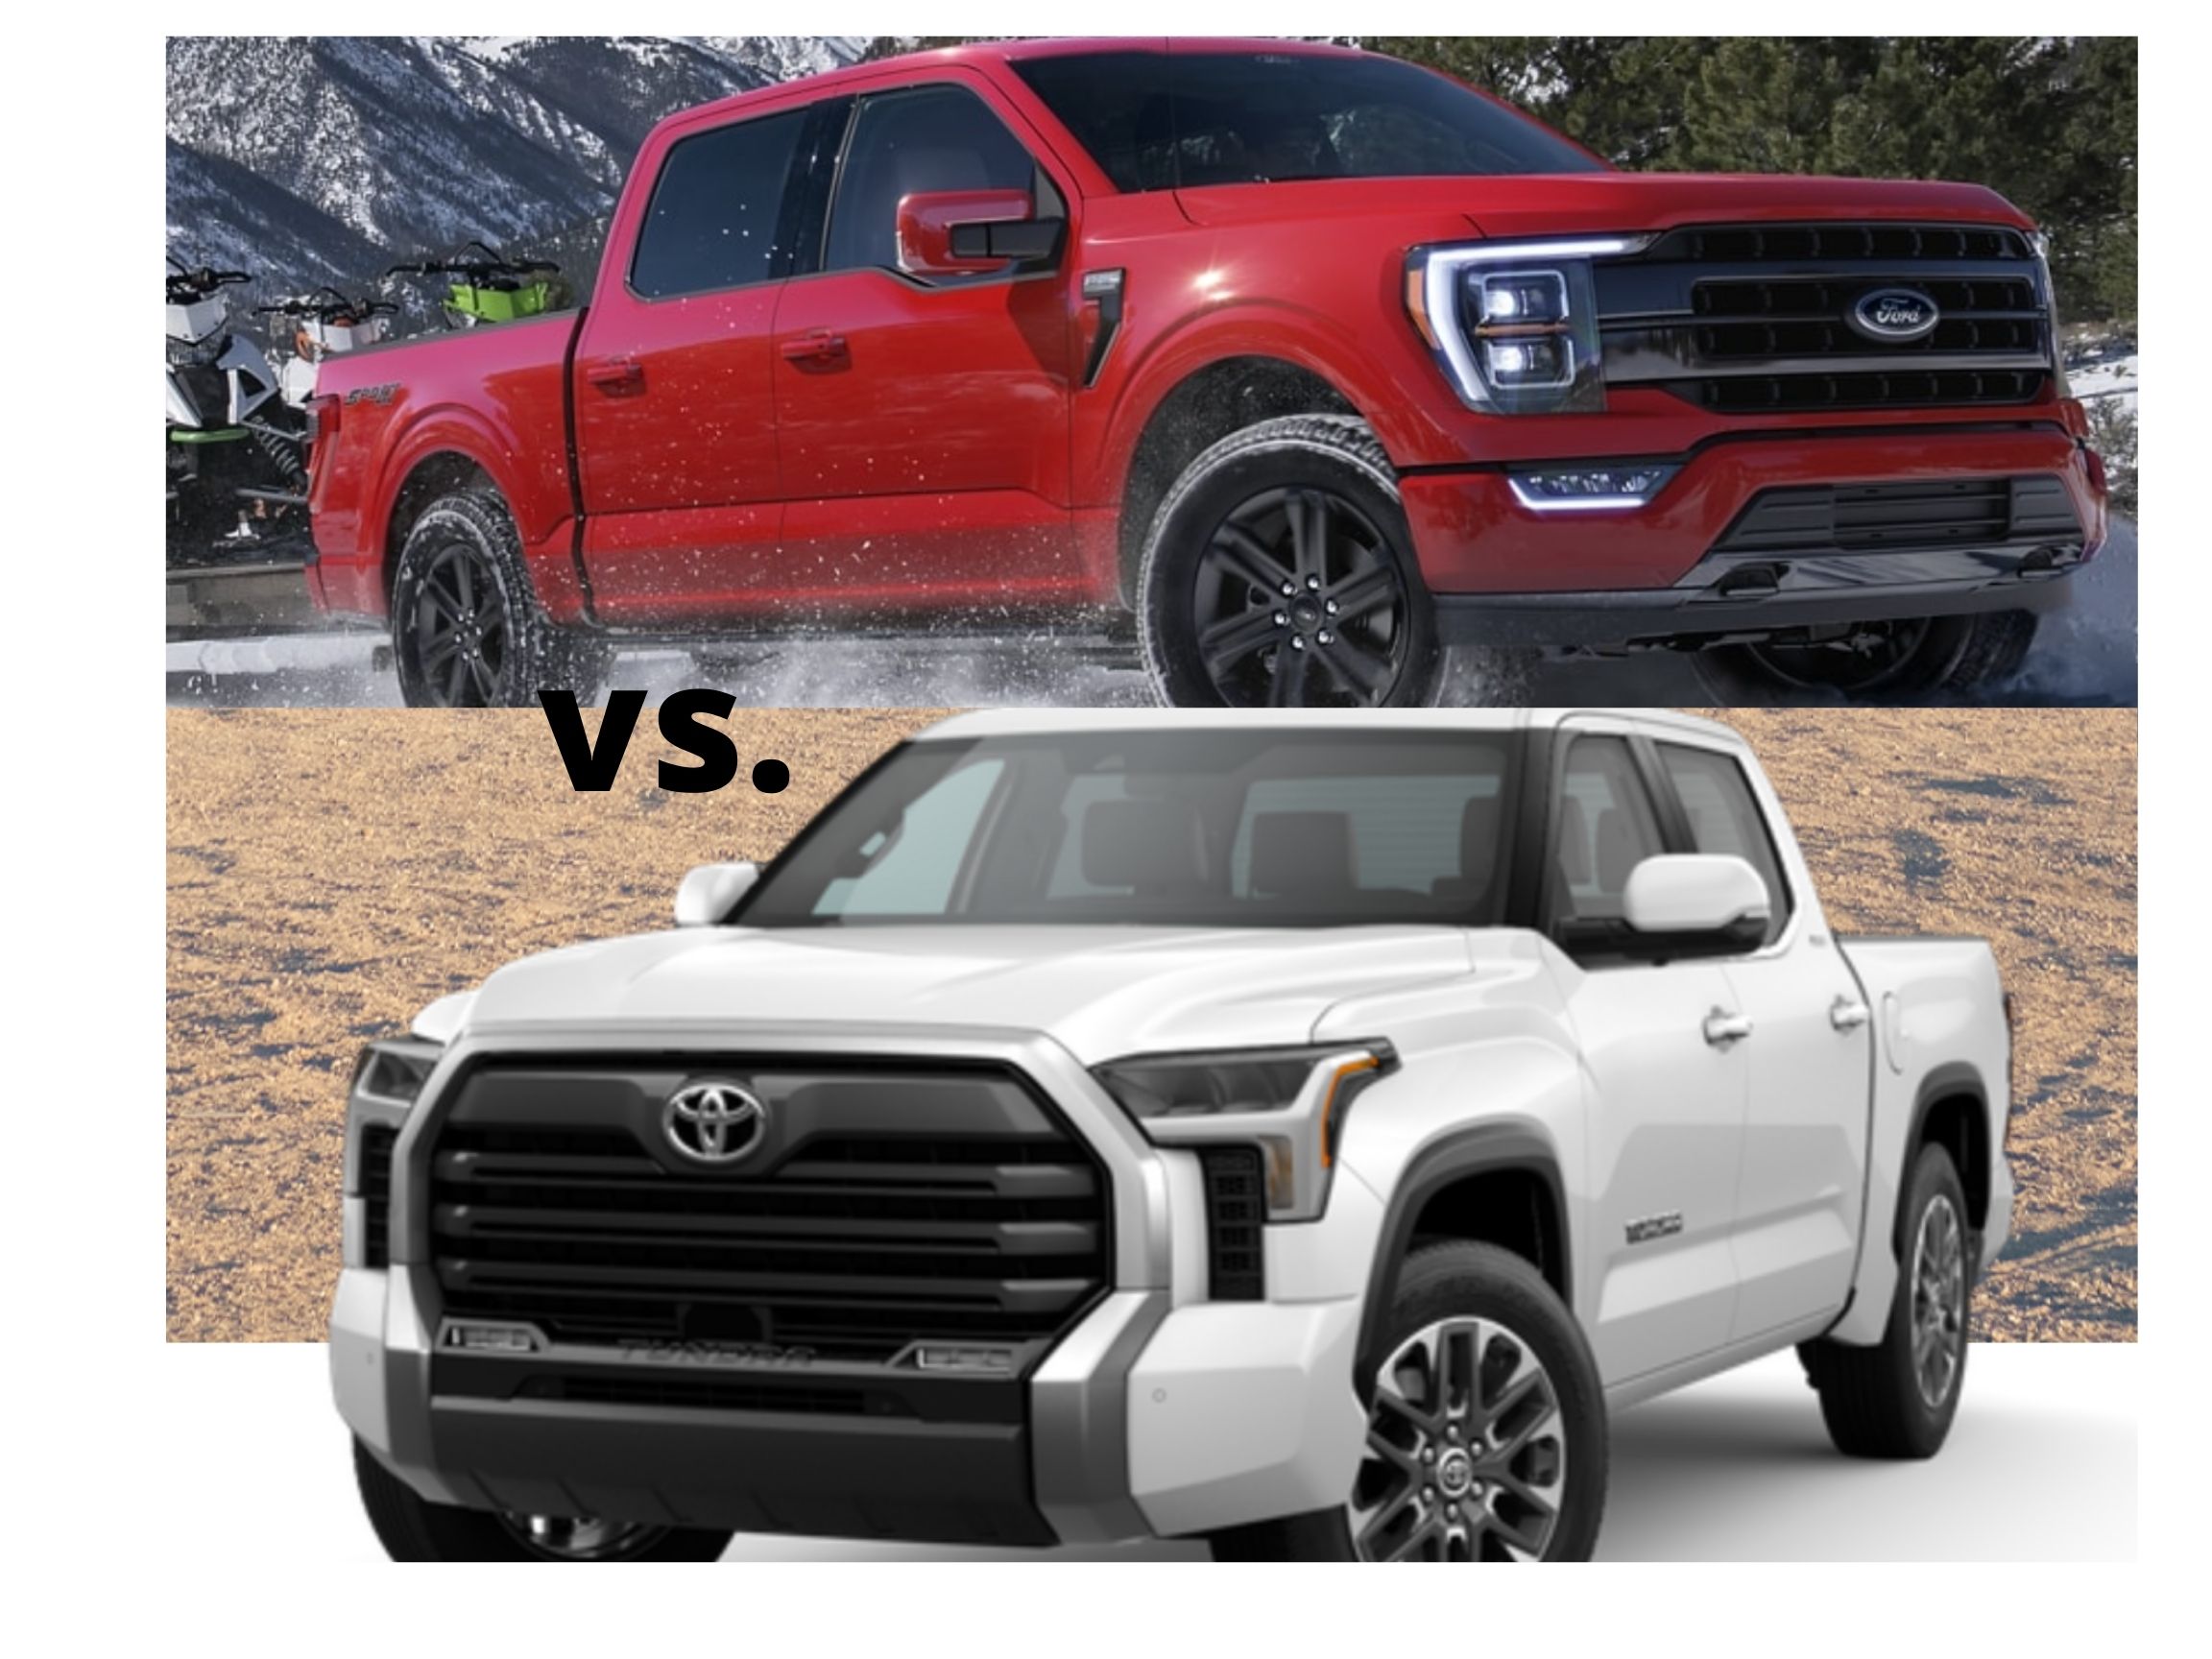 Ford F-150 vs Toyota Tundra: Which Pickup Truck Is Best?